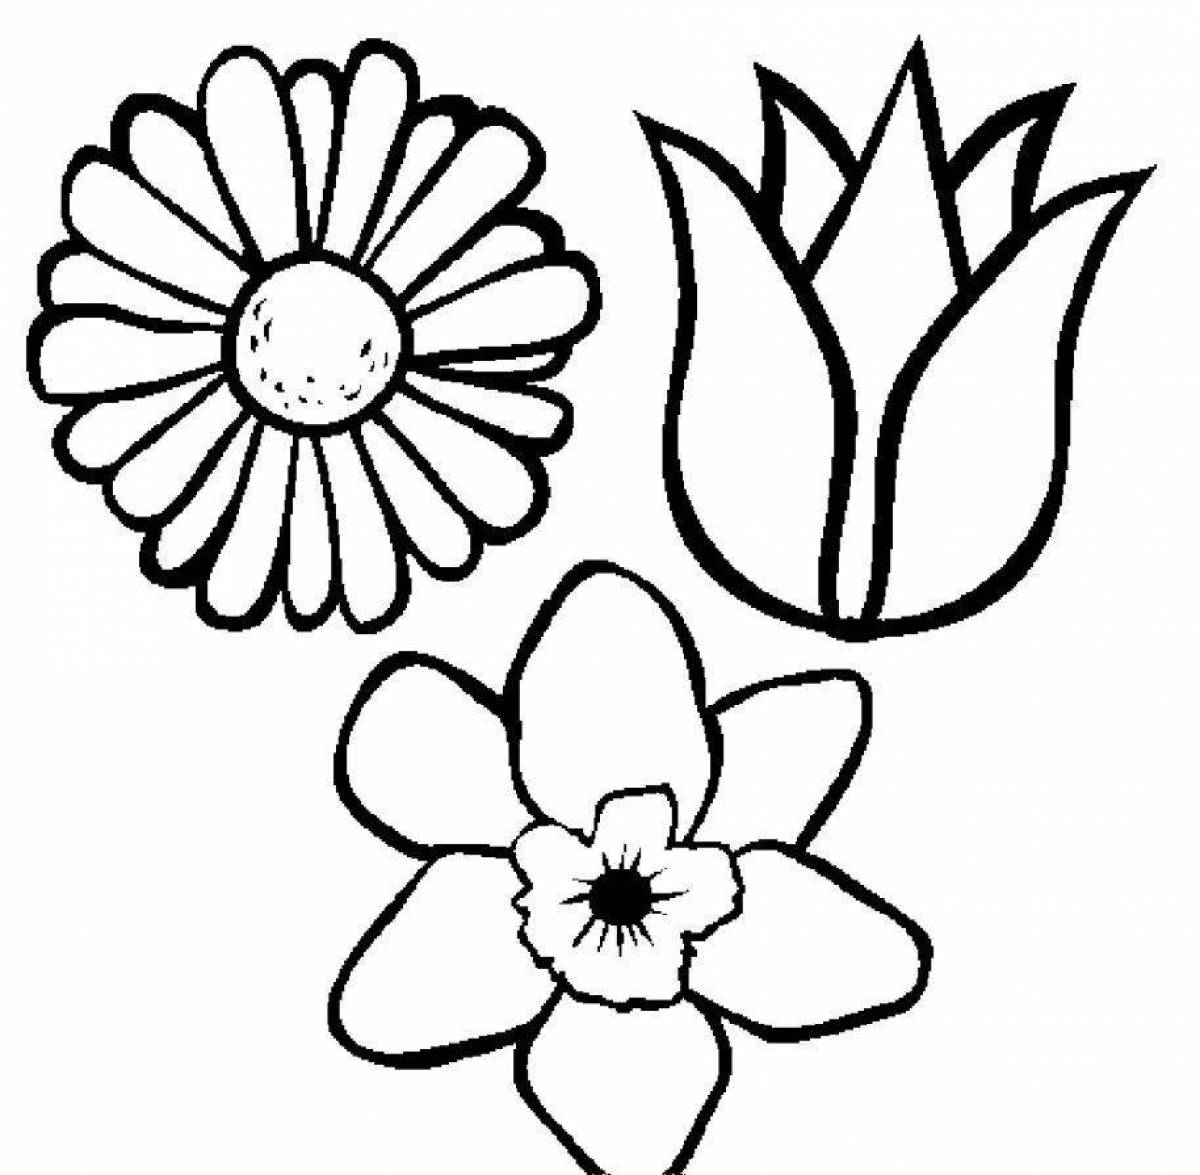 Adorable flower coloring book